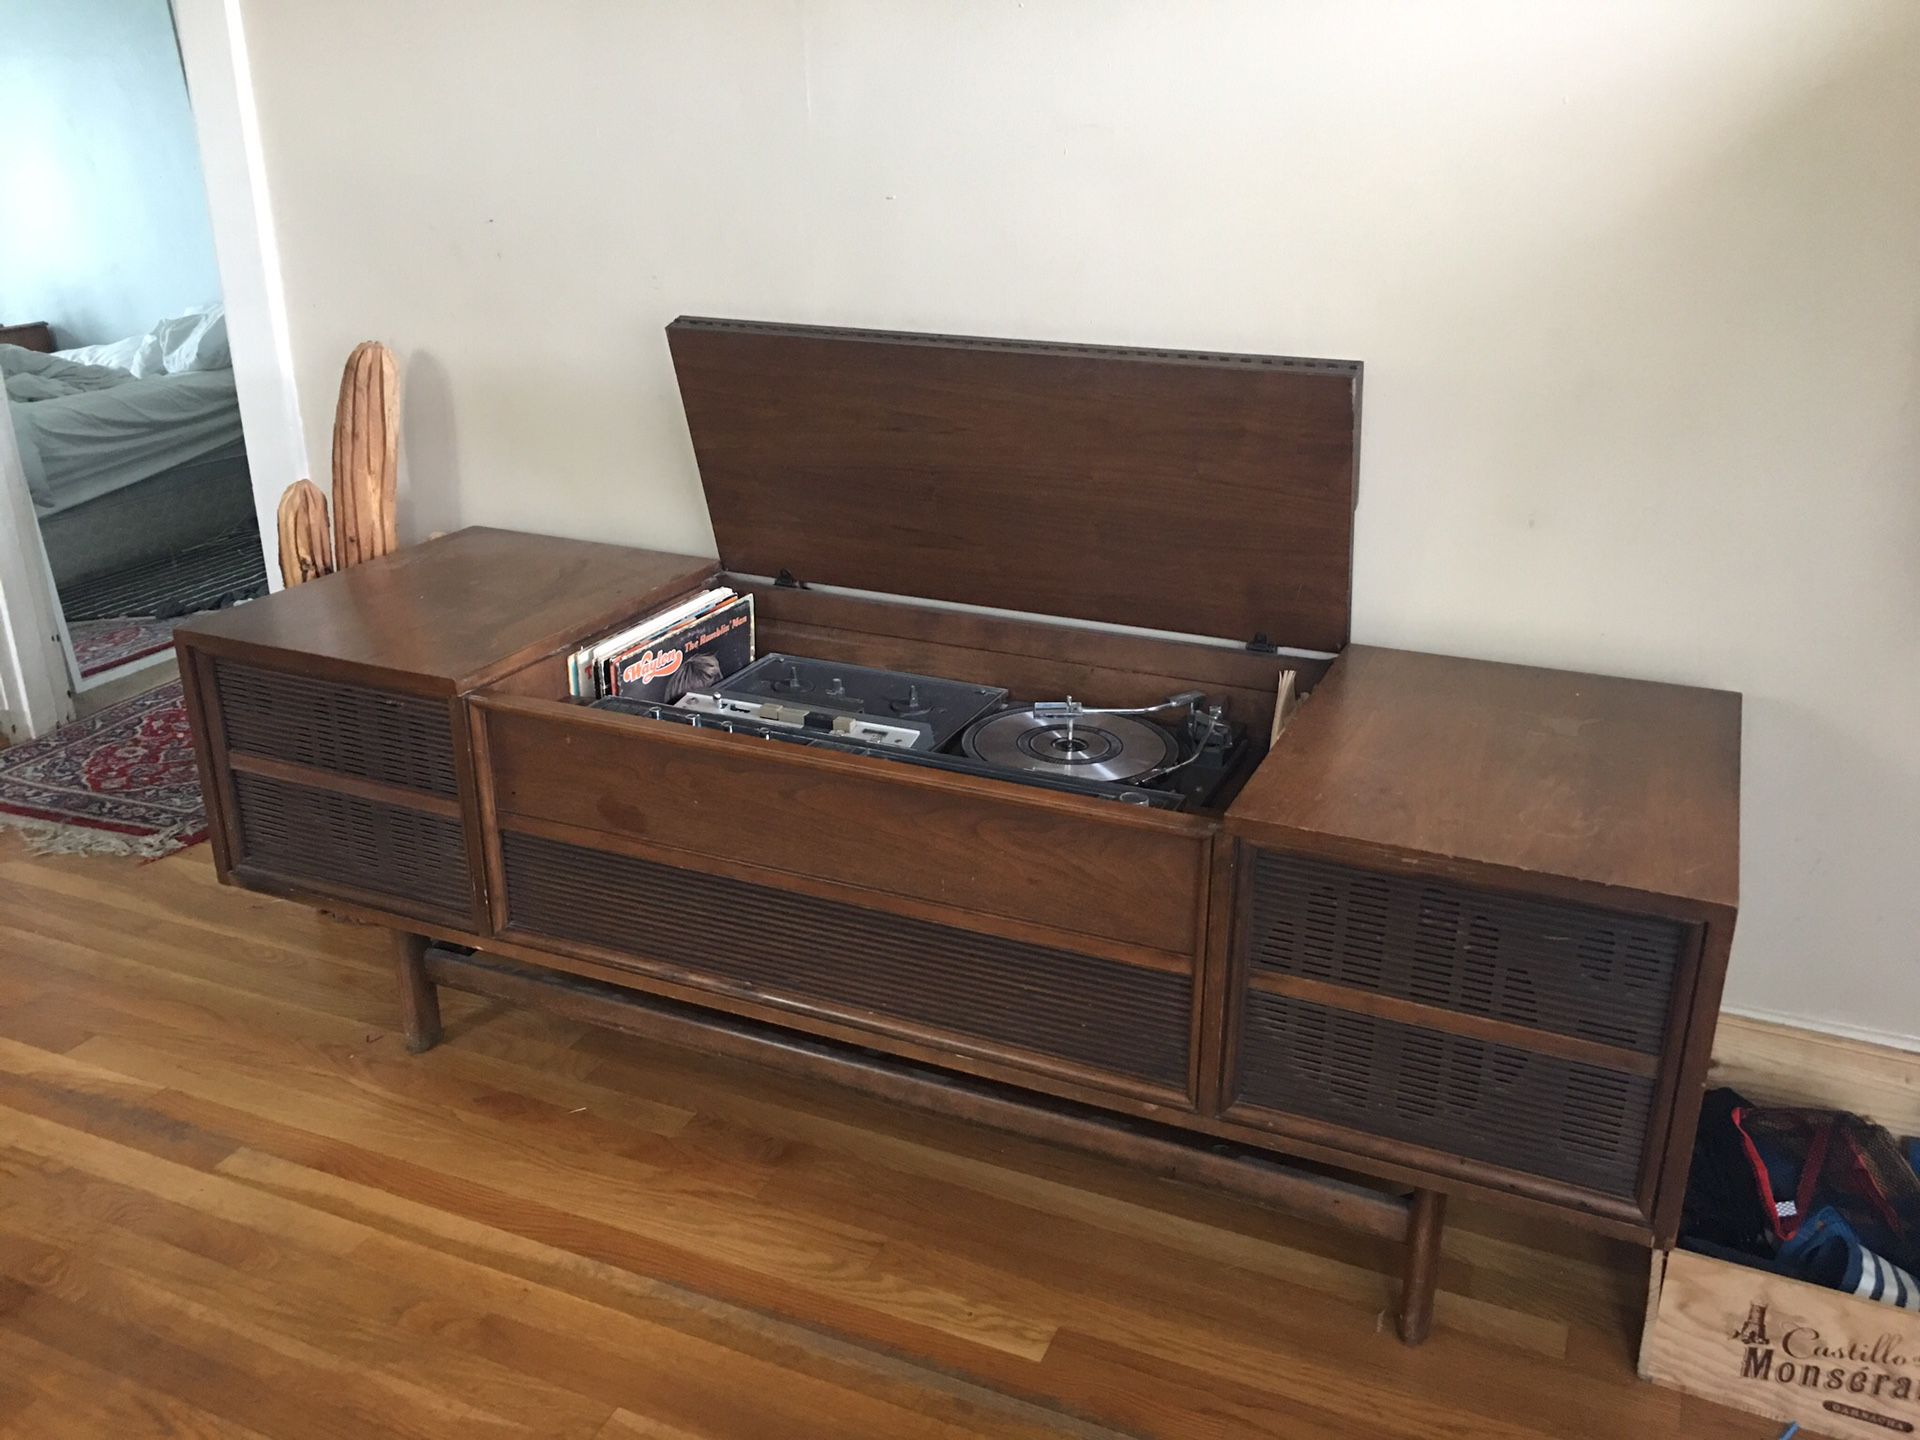 Vintage 1960s GE record player stereo console mid-century design